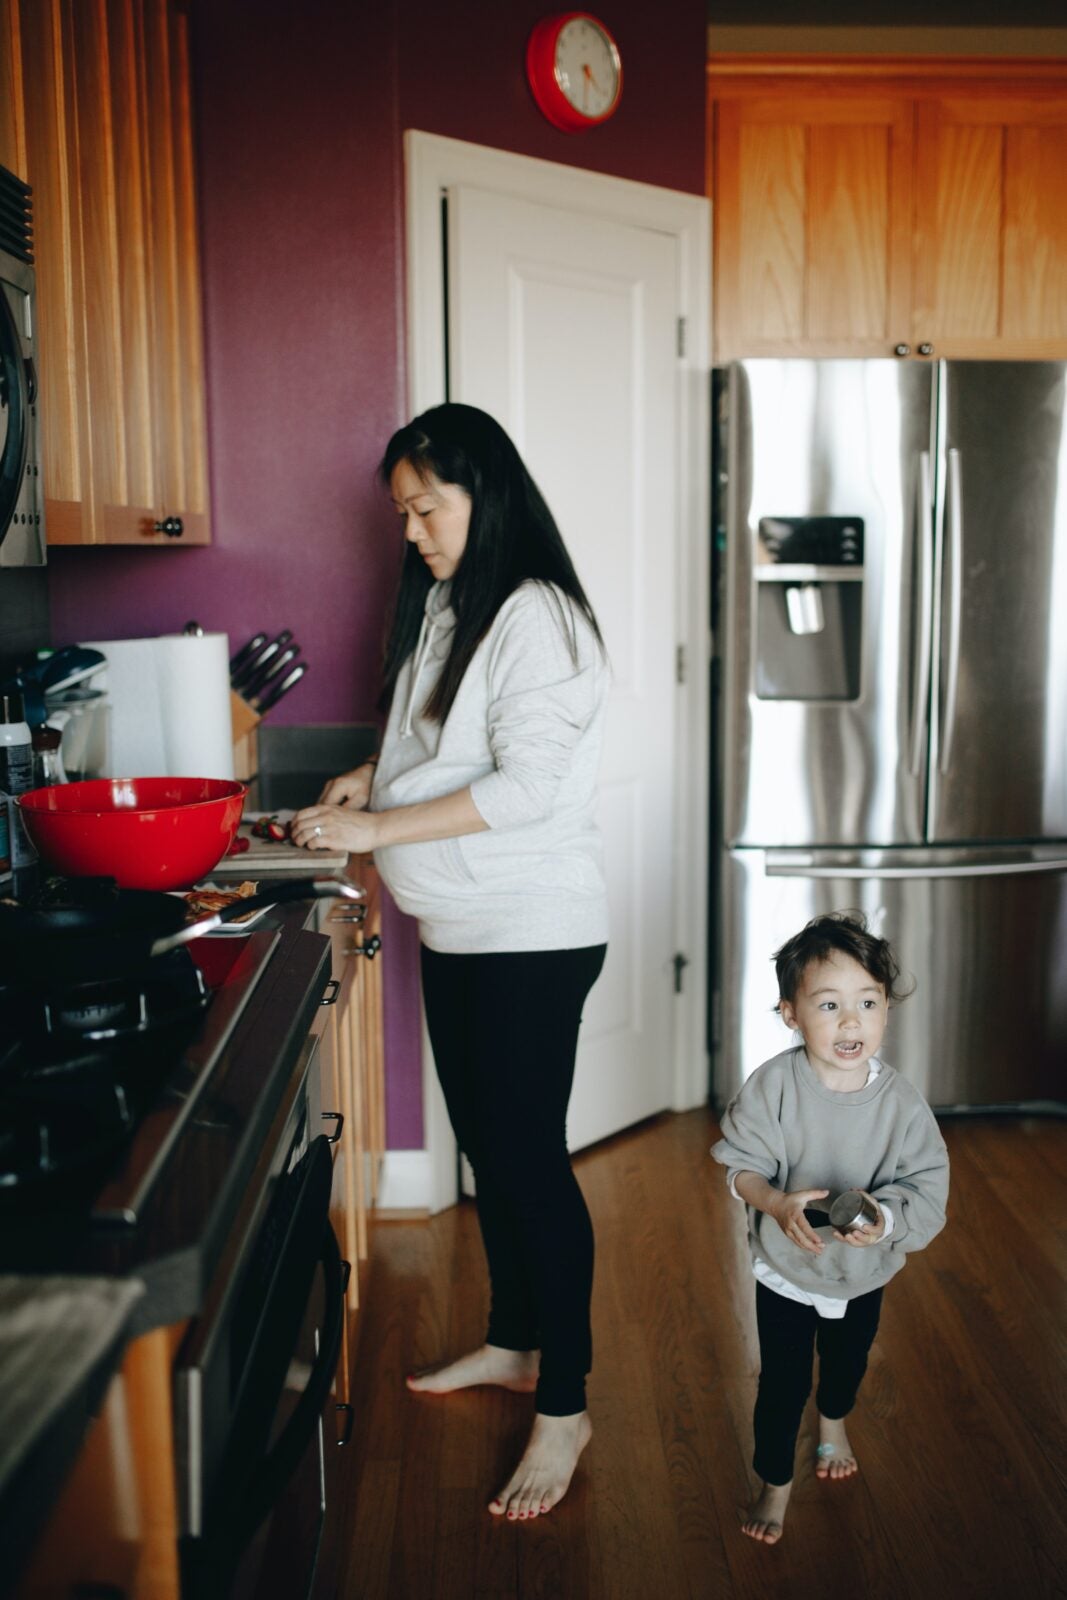 A mother is cooking while her toddler is standing behind her. The toddler has her hands on a toy.